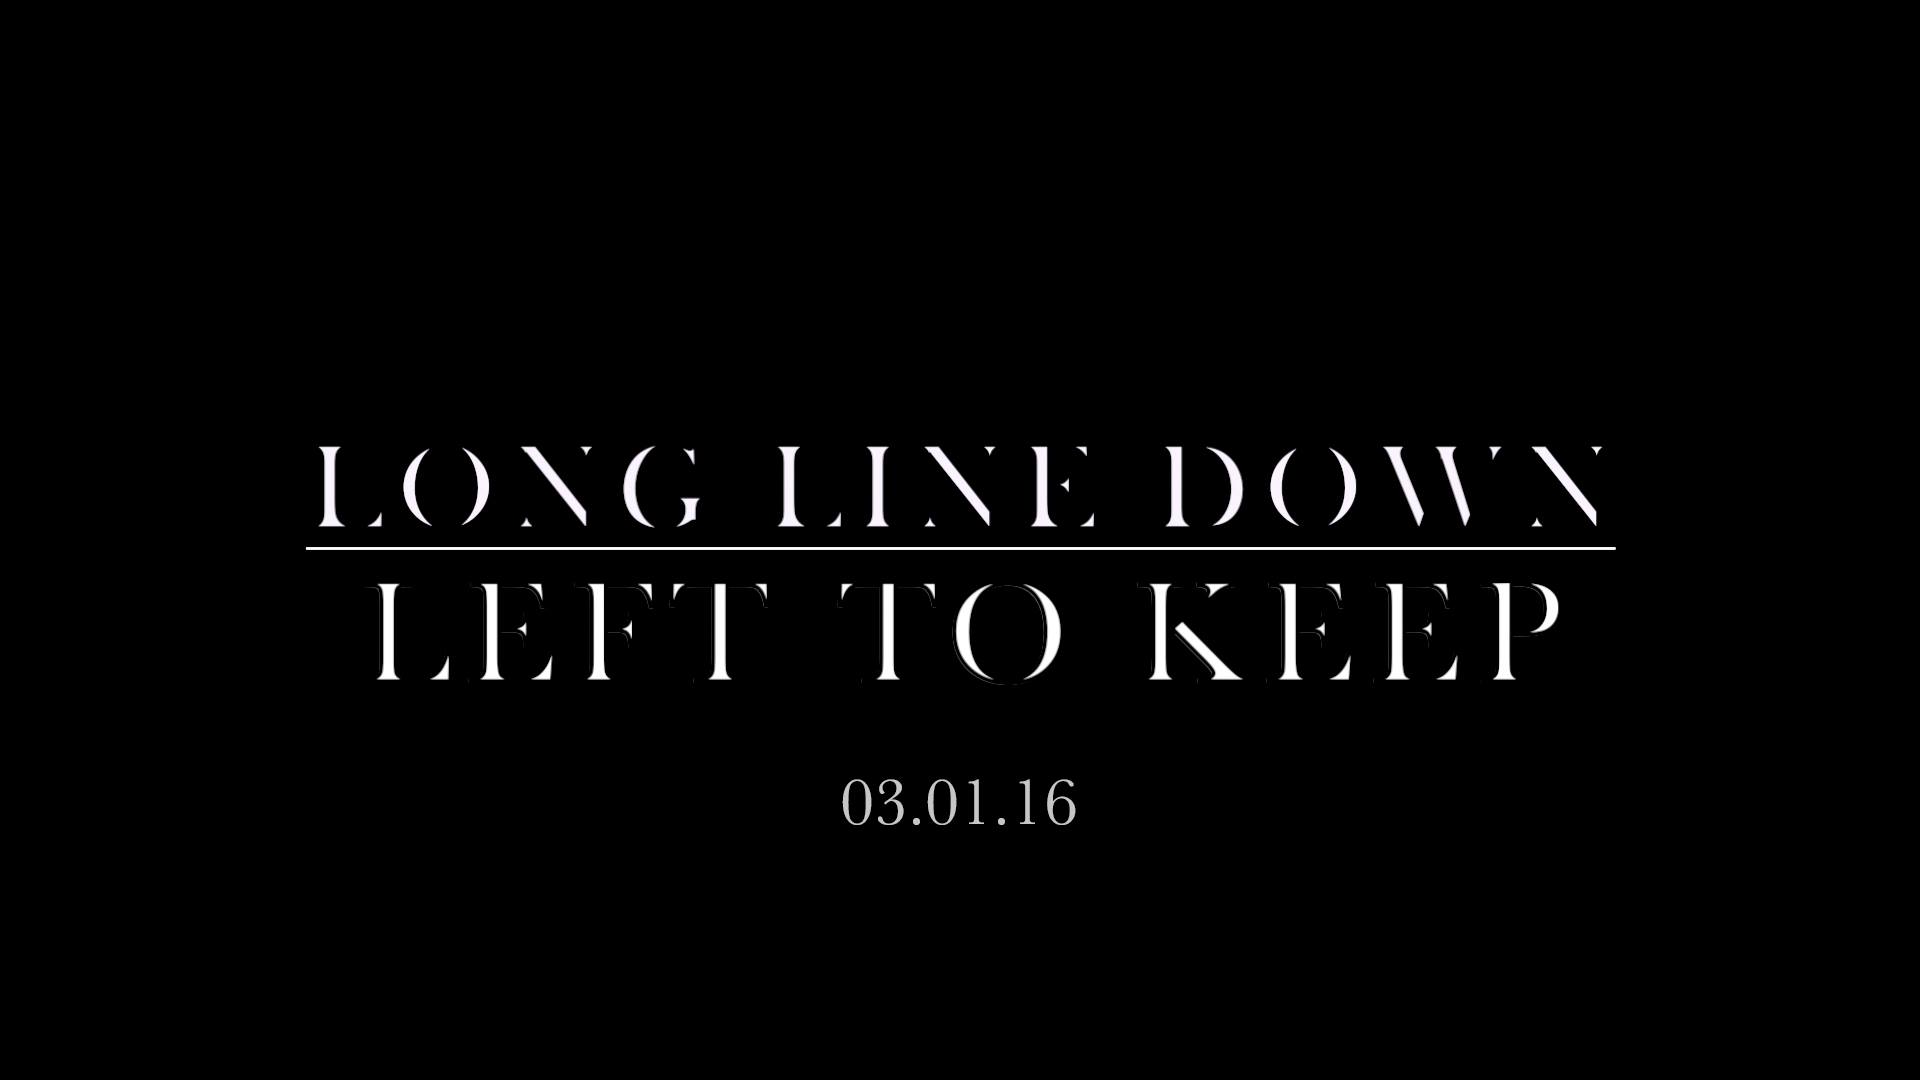 Long Line Down - Left To Keep